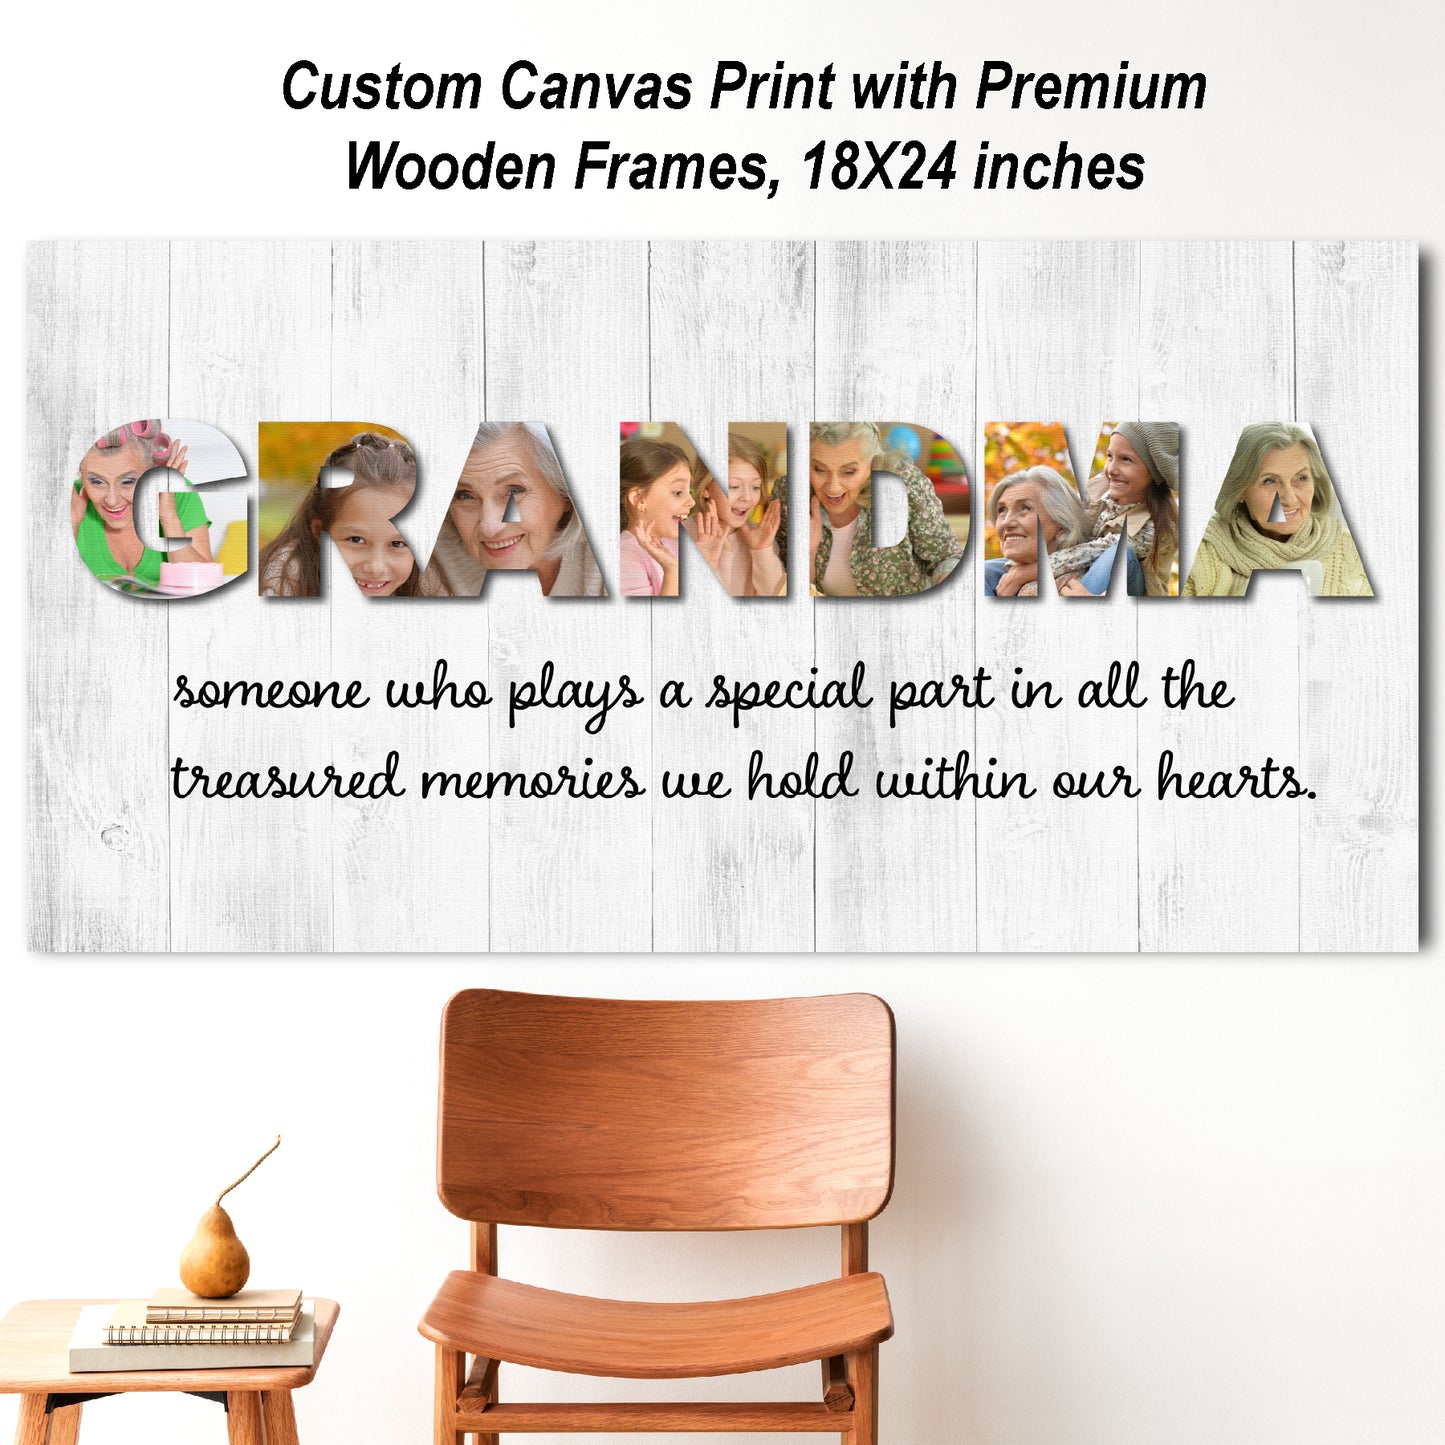 Grandma someone who plays a special part canvas, custom canvas print, custom gift, 18X24 custom canvas, custom gift, custom canvas prints, custom photo canvas, custom canvas wall art, custom family canvas